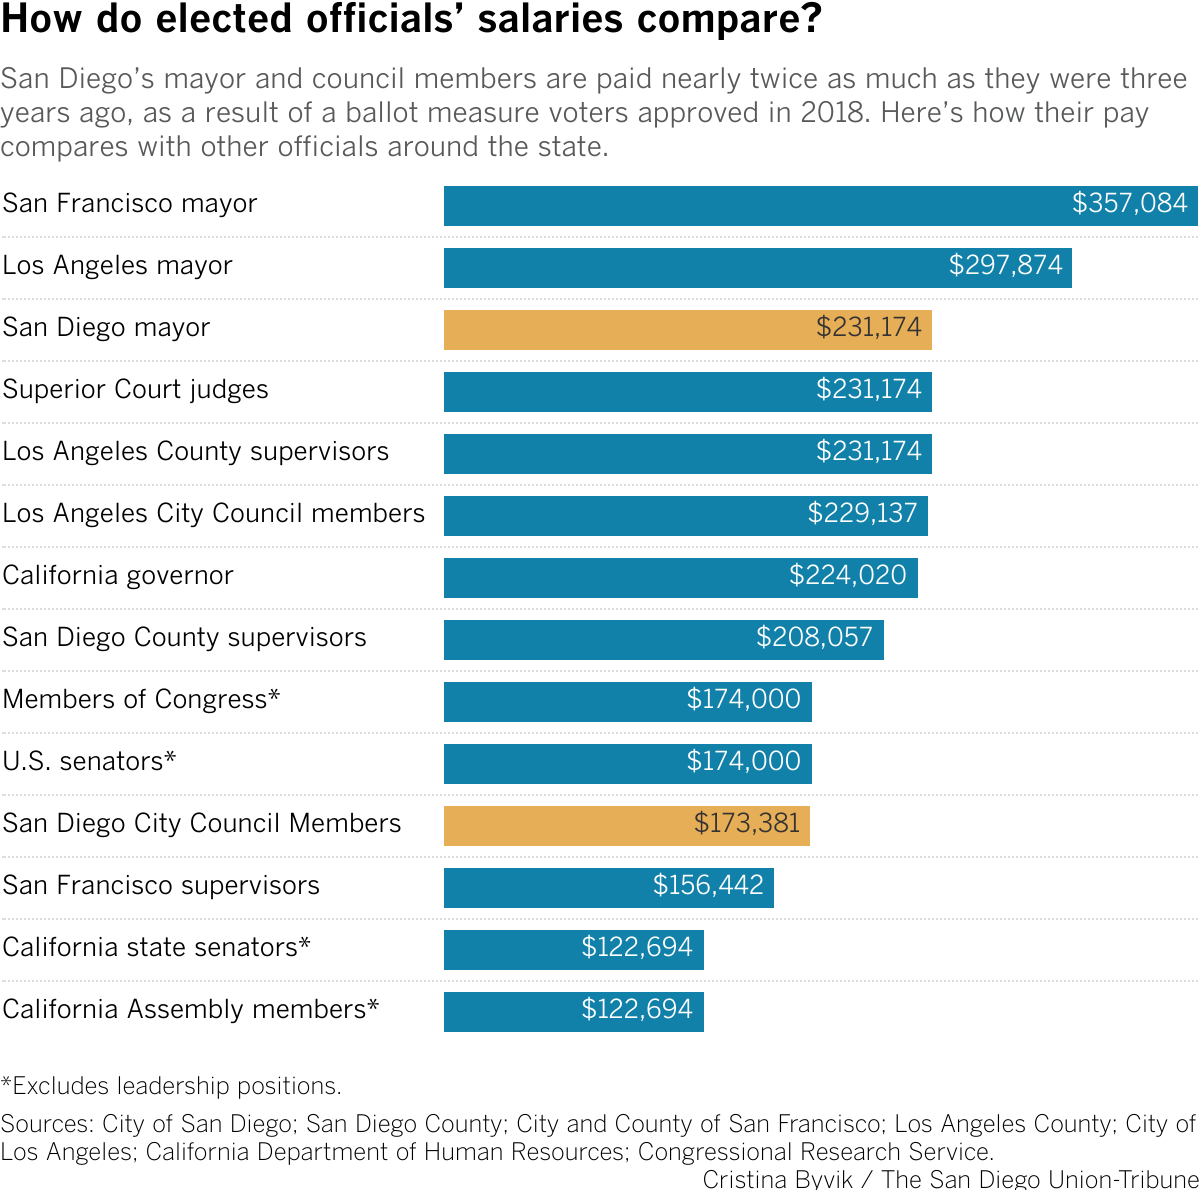 San Diego’s mayor and council members are paid nearly twice as much as they were three years ago, as a result of a ballot measure voters approved in 2018. Here’s how their pay compares with other officials around the state.